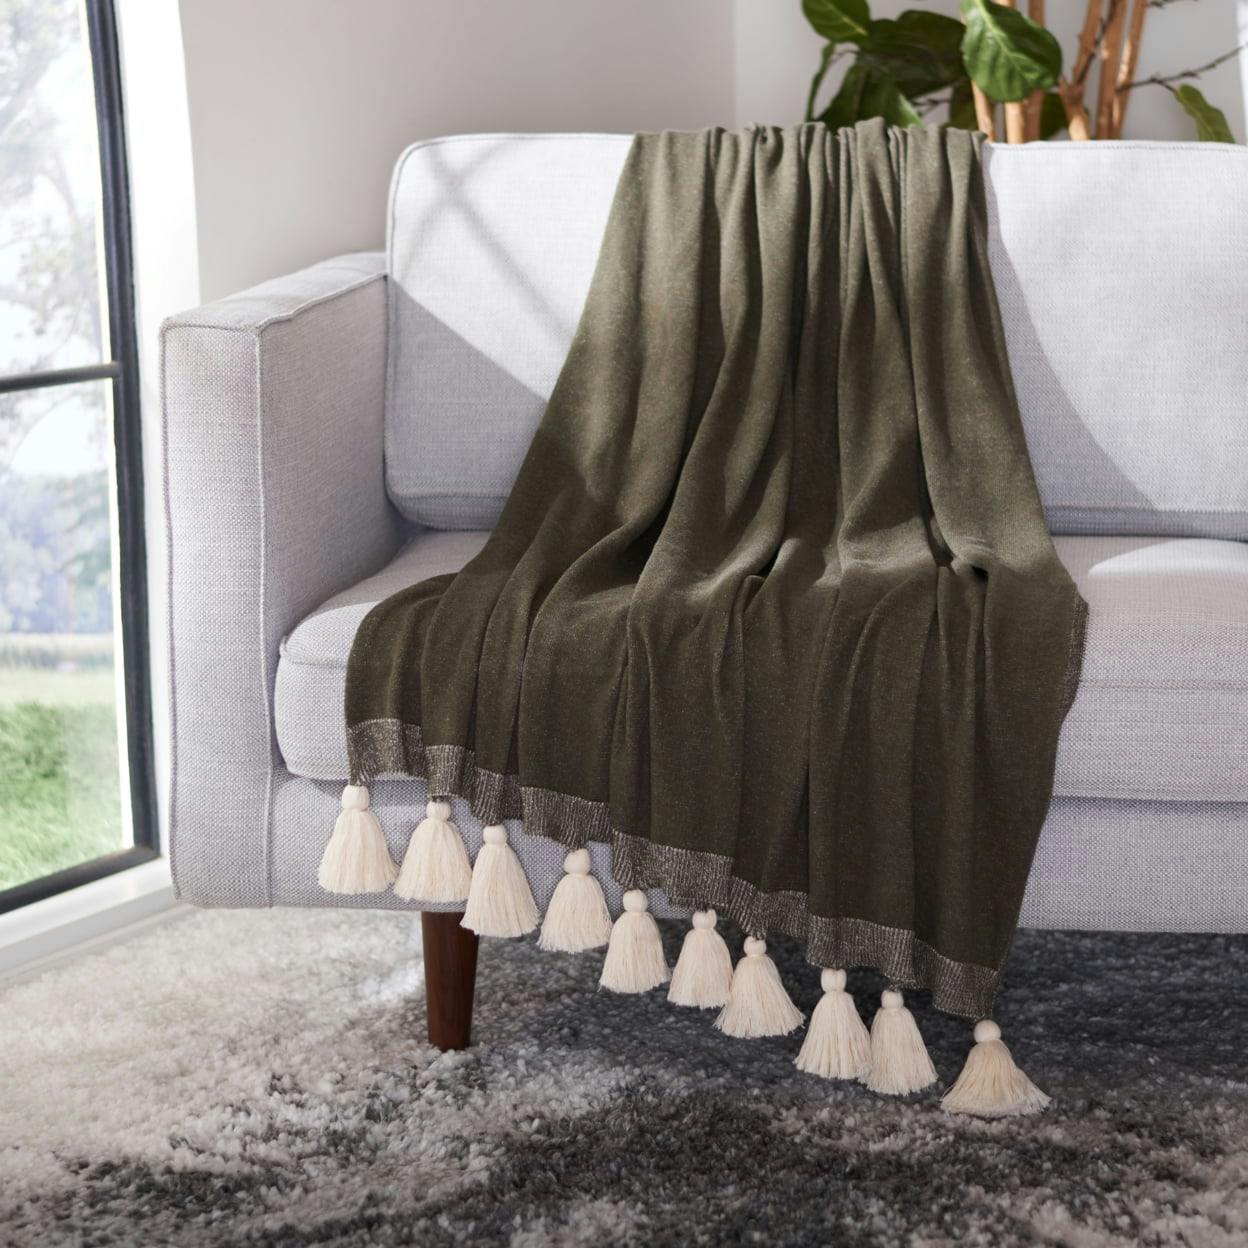 Victorian Elegance Lush Green and Beige Cotton Throw with Plush Tassels